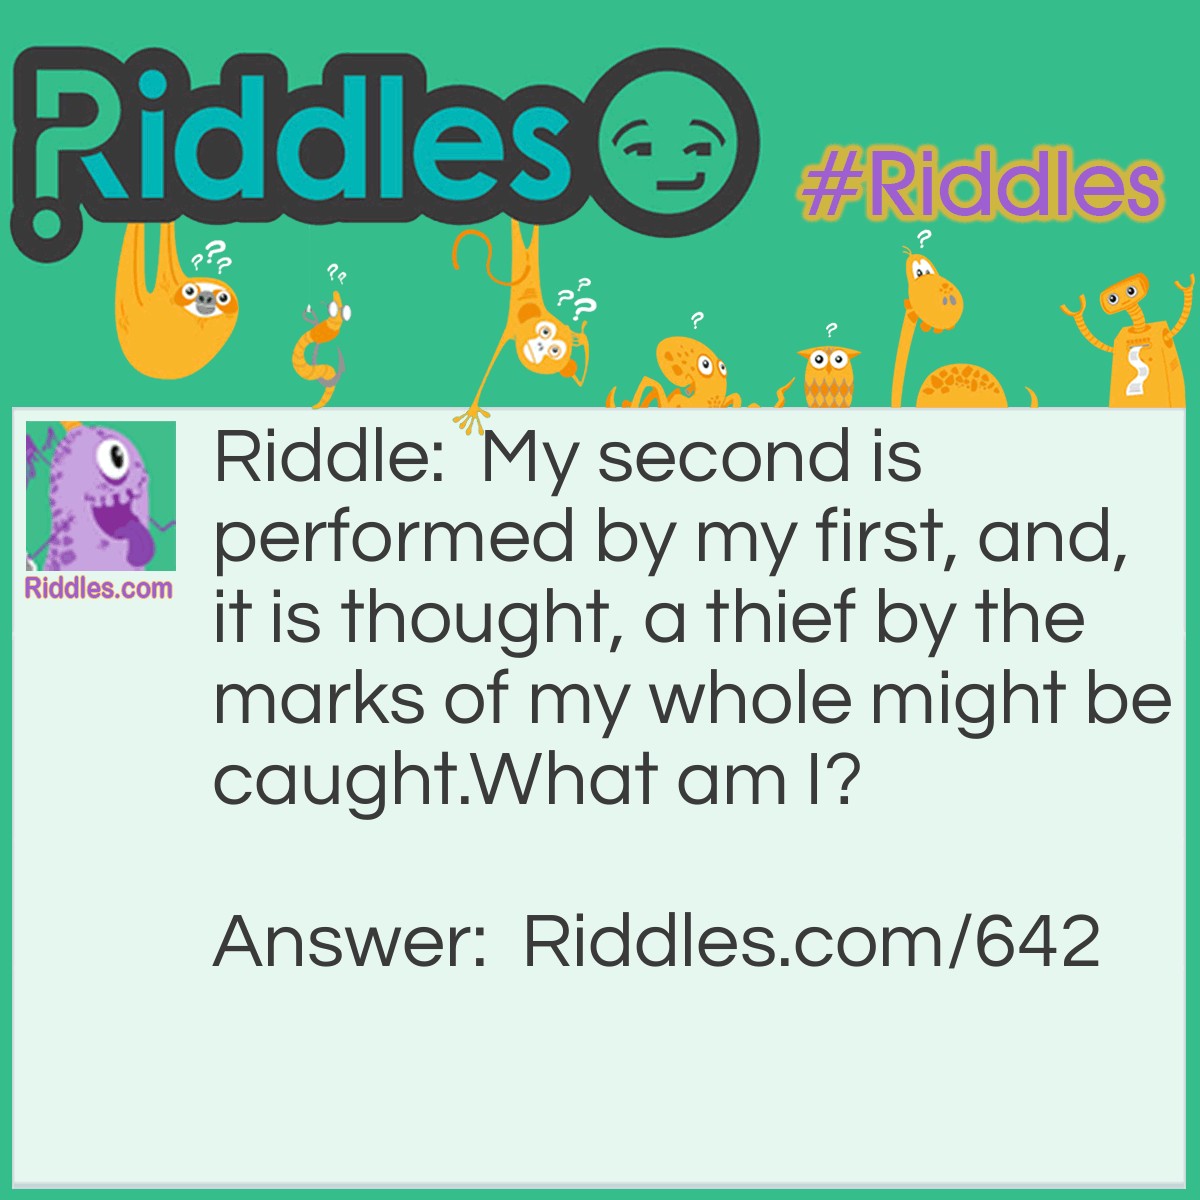 Riddle: My second is performed by my first, and, it is thought, a thief by the marks of my whole might be caught.
What am I? Answer: A Footstep.